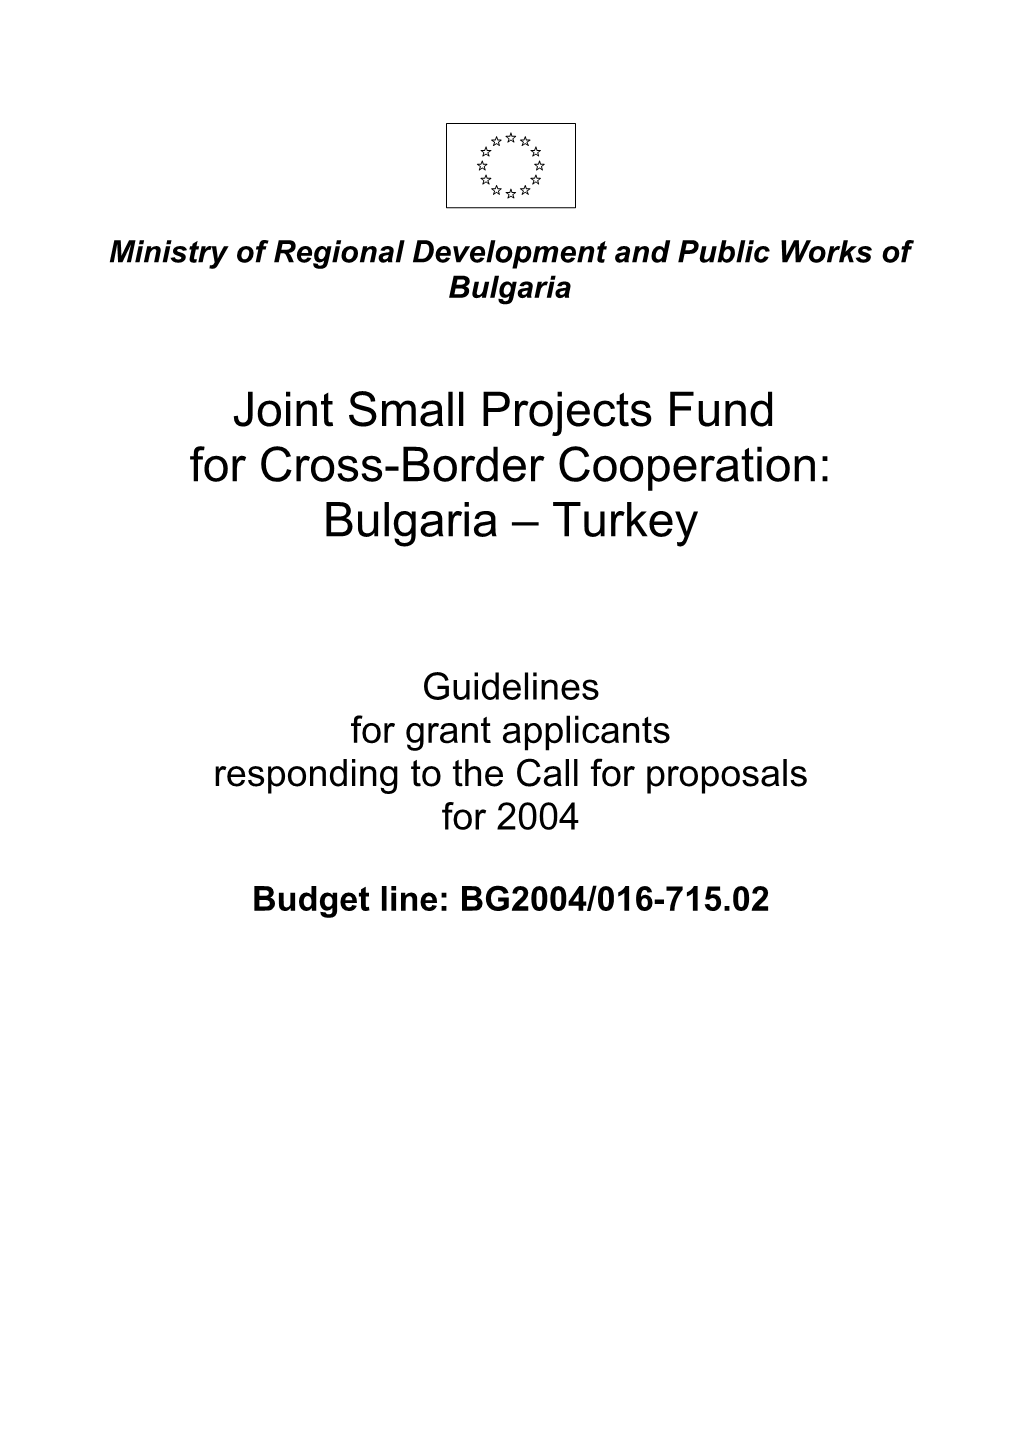 Ministry of Regional Development and Public Works of Bulgaria